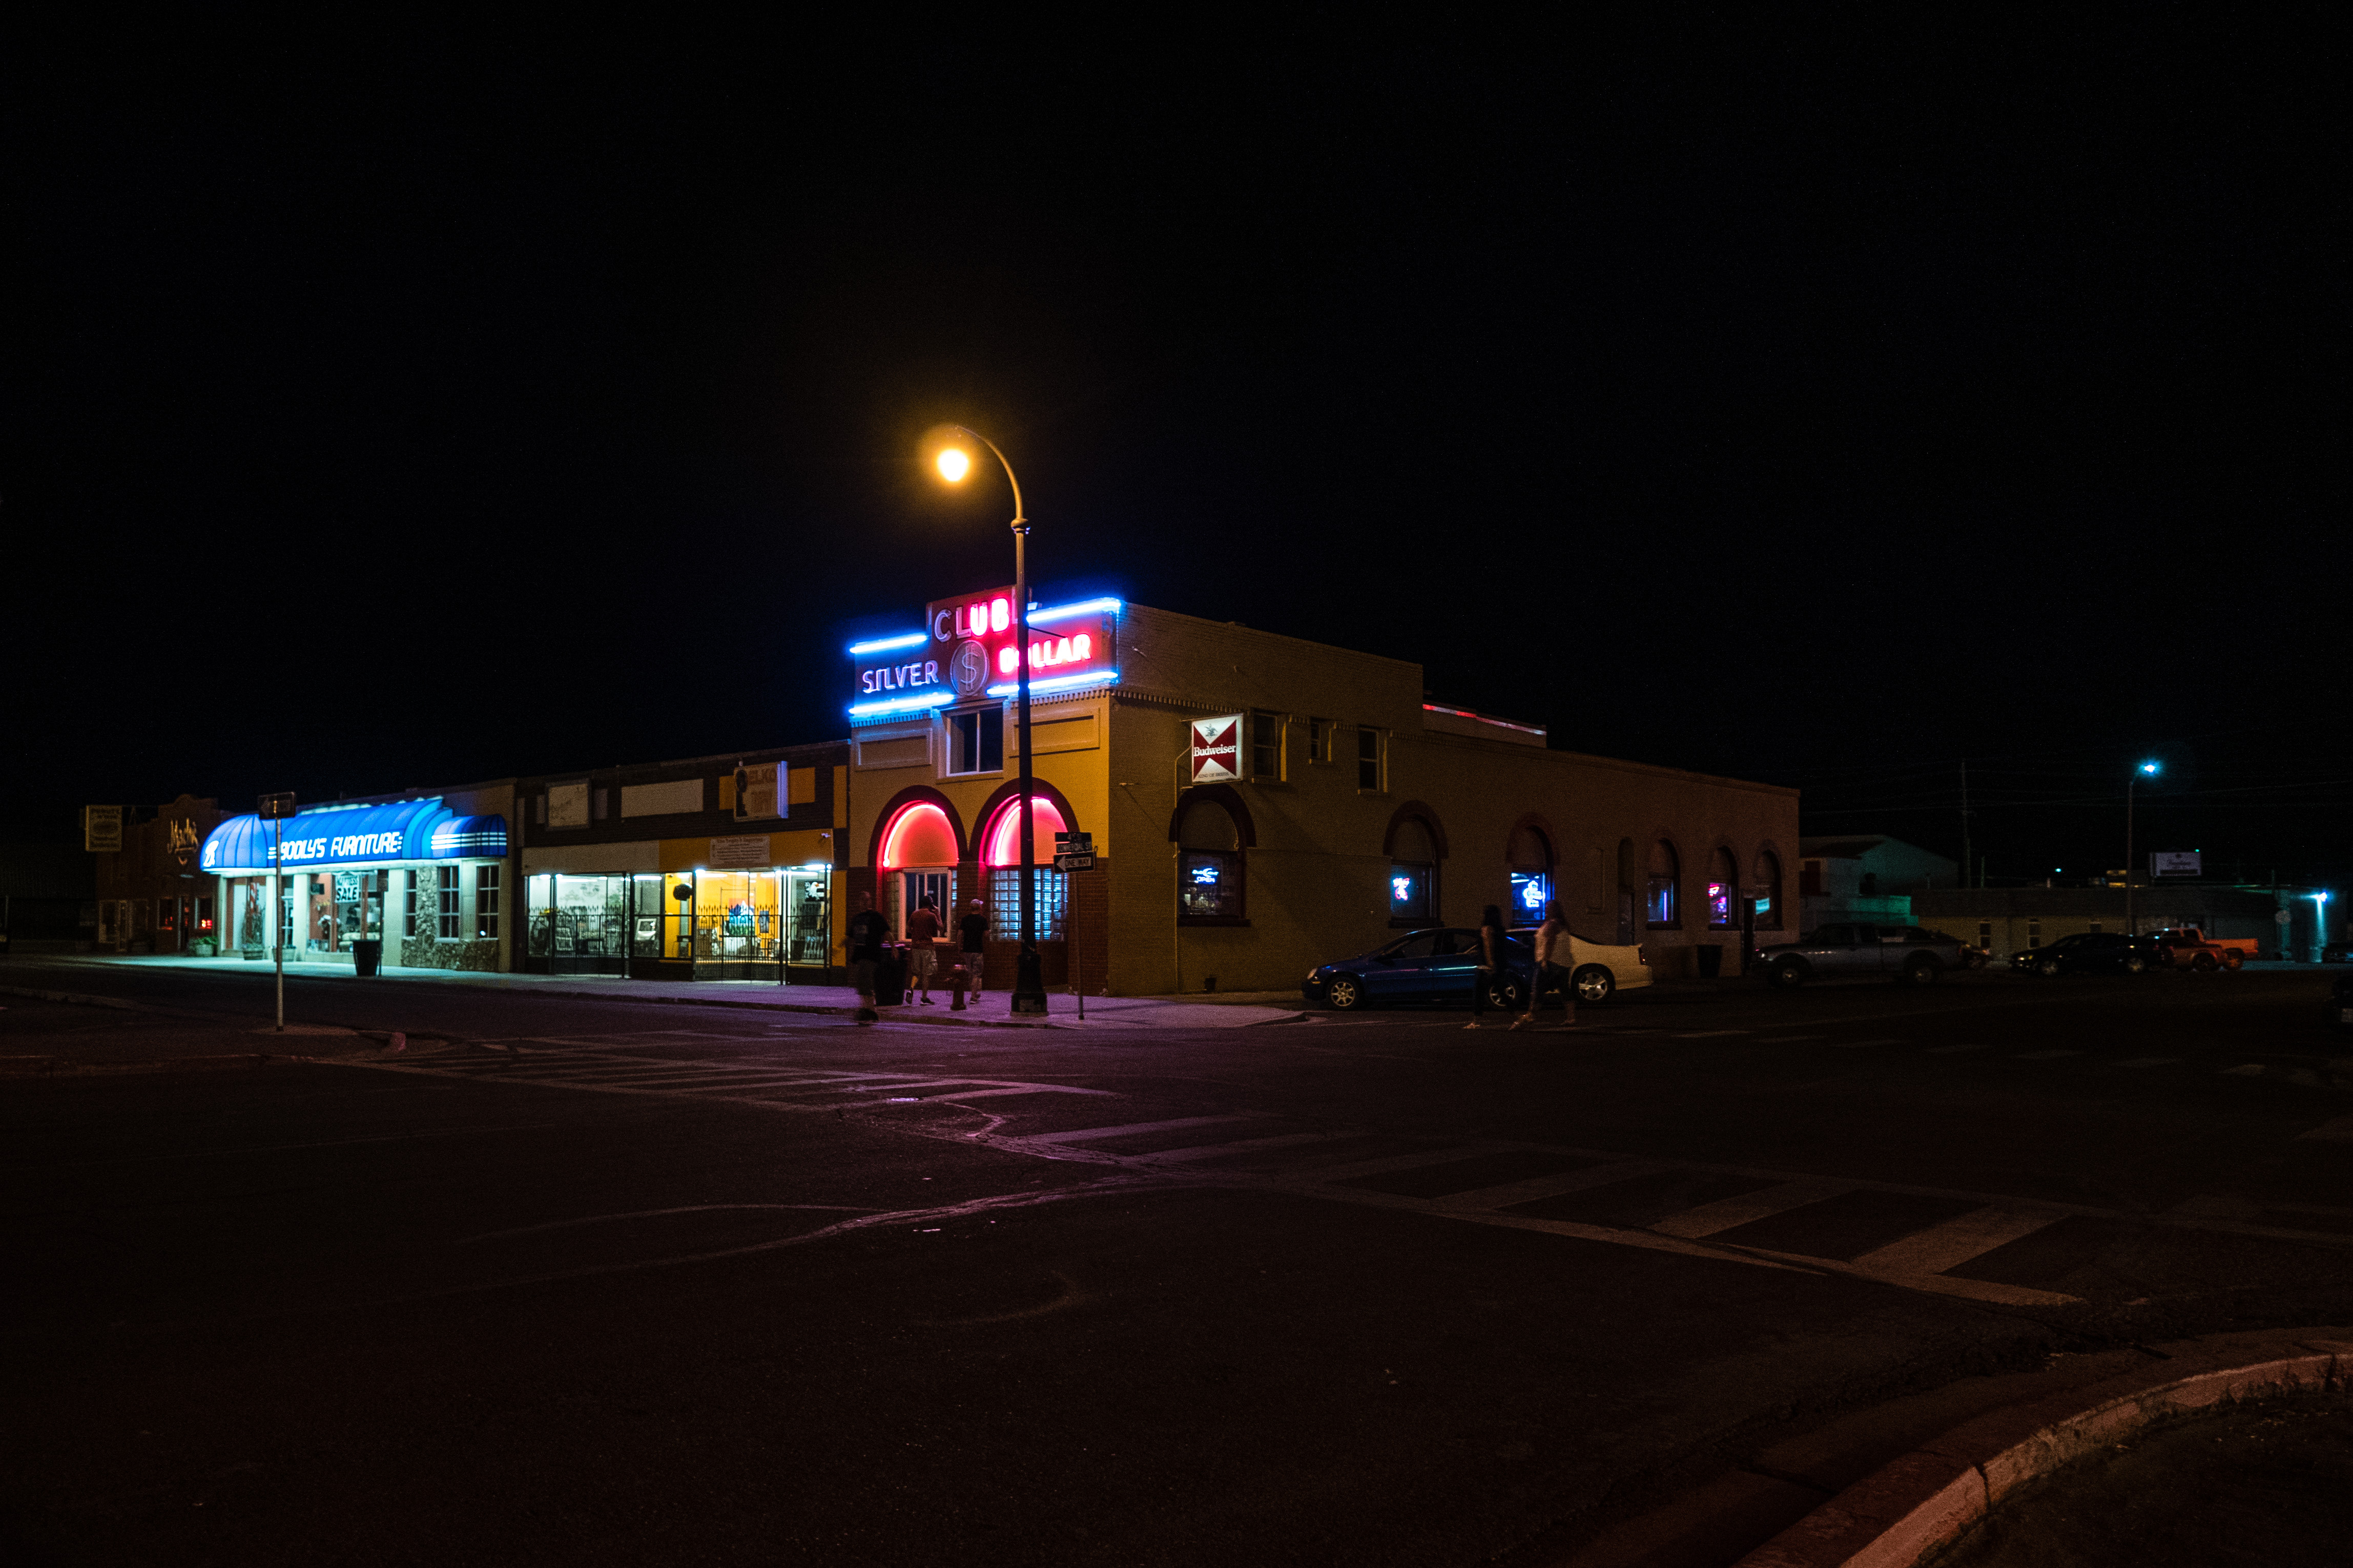 Evening photograph of a street corner in Elko, Nevada. On the corner is a long, low, older building, pale yellow with arched windows. At the top of the facade, in neon, is "SILVER DOLLAR CLUB" in red and blue neon. The letters "C" and "L" of the word "CLUB" are unlit, possibly broken. Below is the entrance to the club, with neon outlining the arched above the entrance and the arch above the main window. To the side, are additional windows with neon signs of alcohol brands. To the left are additional local shops with their display windows lit but they are otherwise closed. One of the stores has a blue awning with the word "FURNITURE" clearly visible. A single street lamp stands on the corner in front of the club. The sidewalk is dimly lit by the shop lights and street lamp. To the right of the club, cars are parked in the shadows. Two people can be seen walking in front of the club. Two woman can be seen walking across the street to the club. They are blurry.